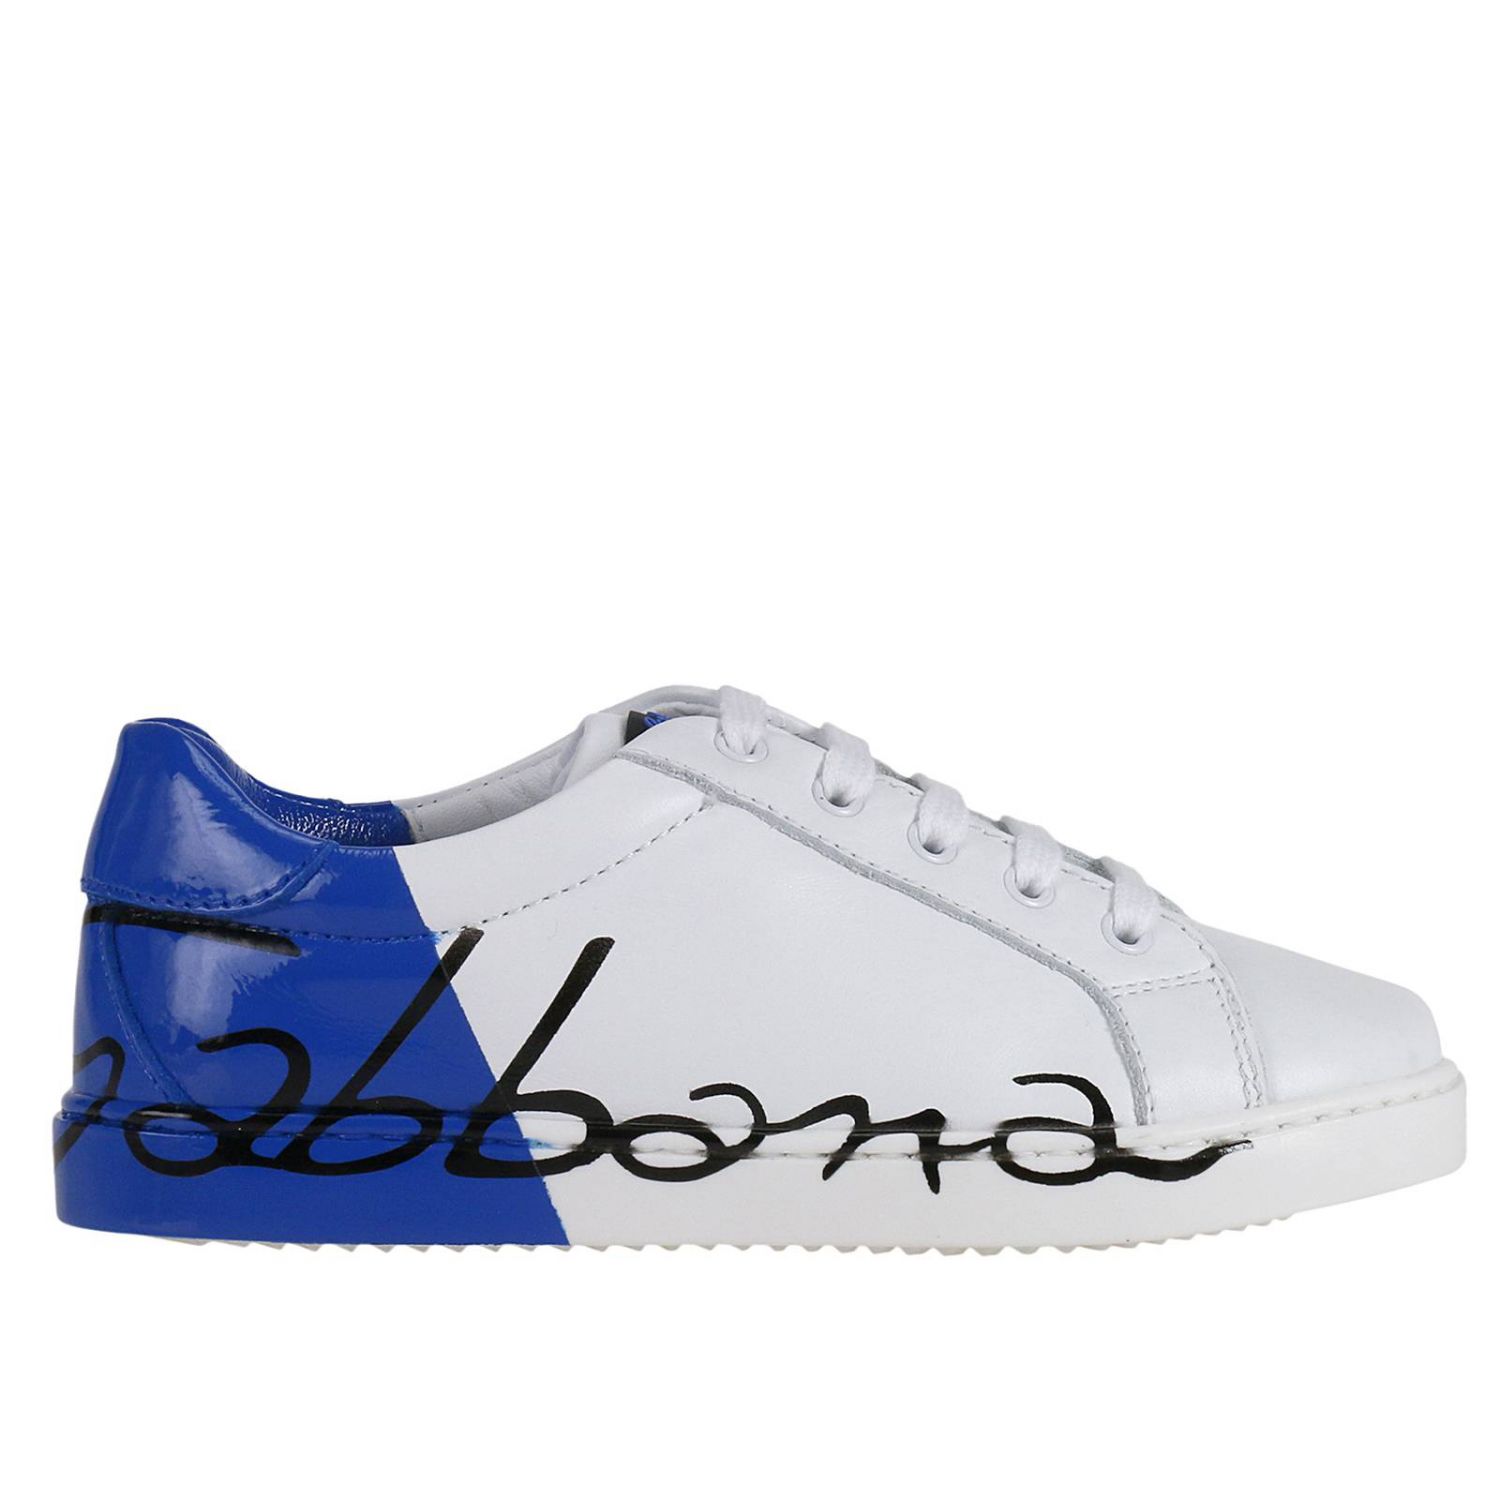 dolce and gabbana shoes blue